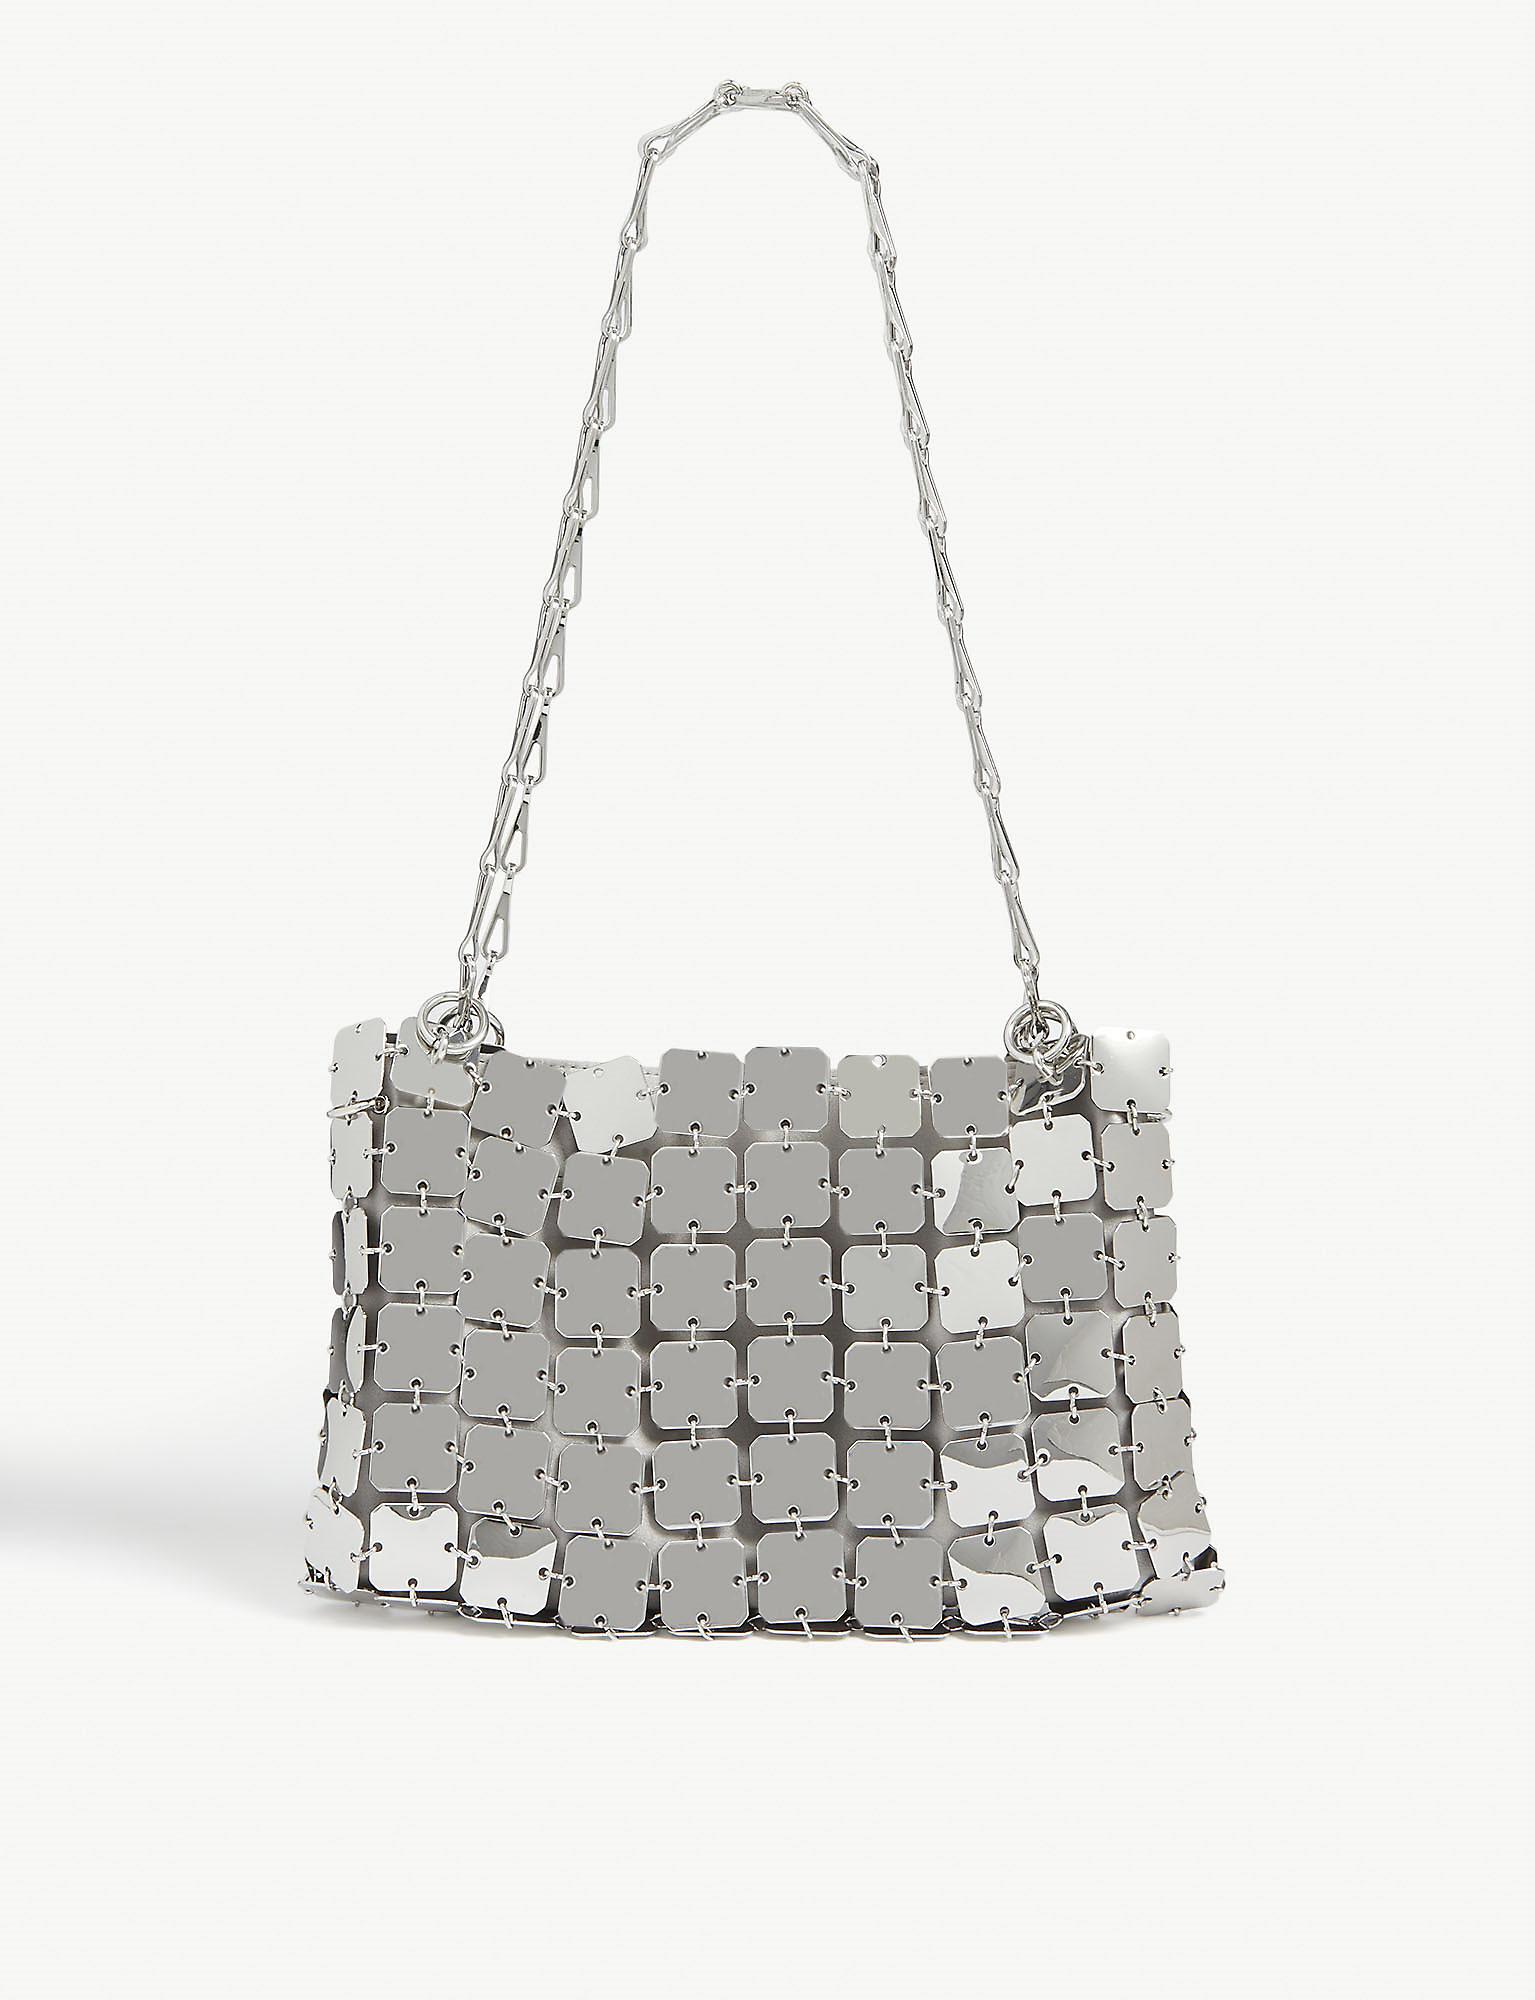 Paco Rabanne Iconic Square Disk Shoulder Bag in Metallic - Lyst